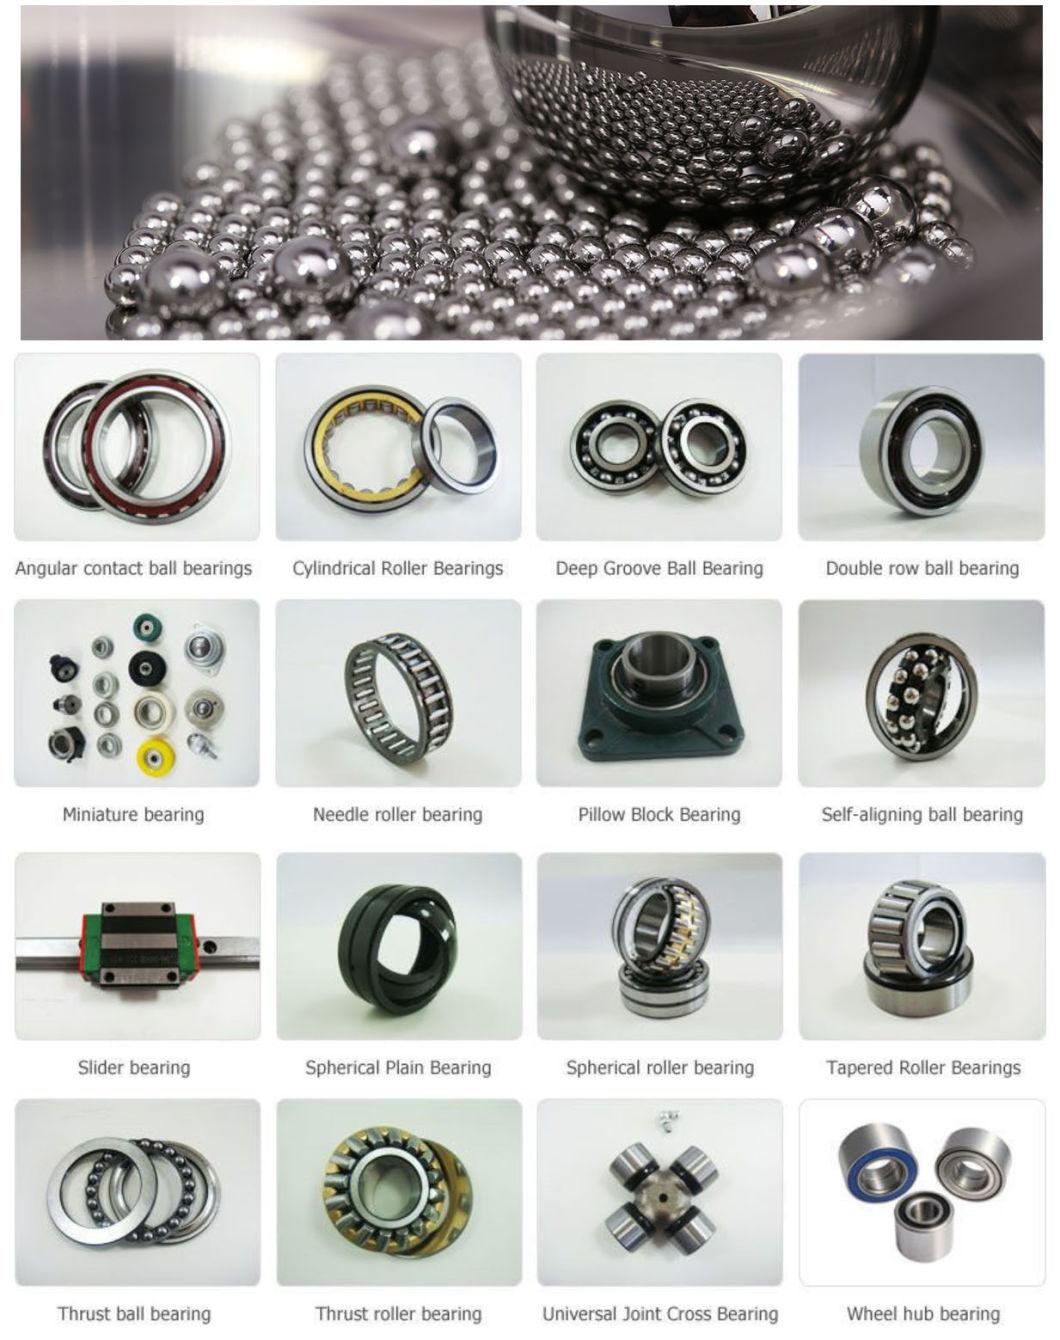 High Quality Wear Resistance and Pressure Resistance Needle Roller Bearing